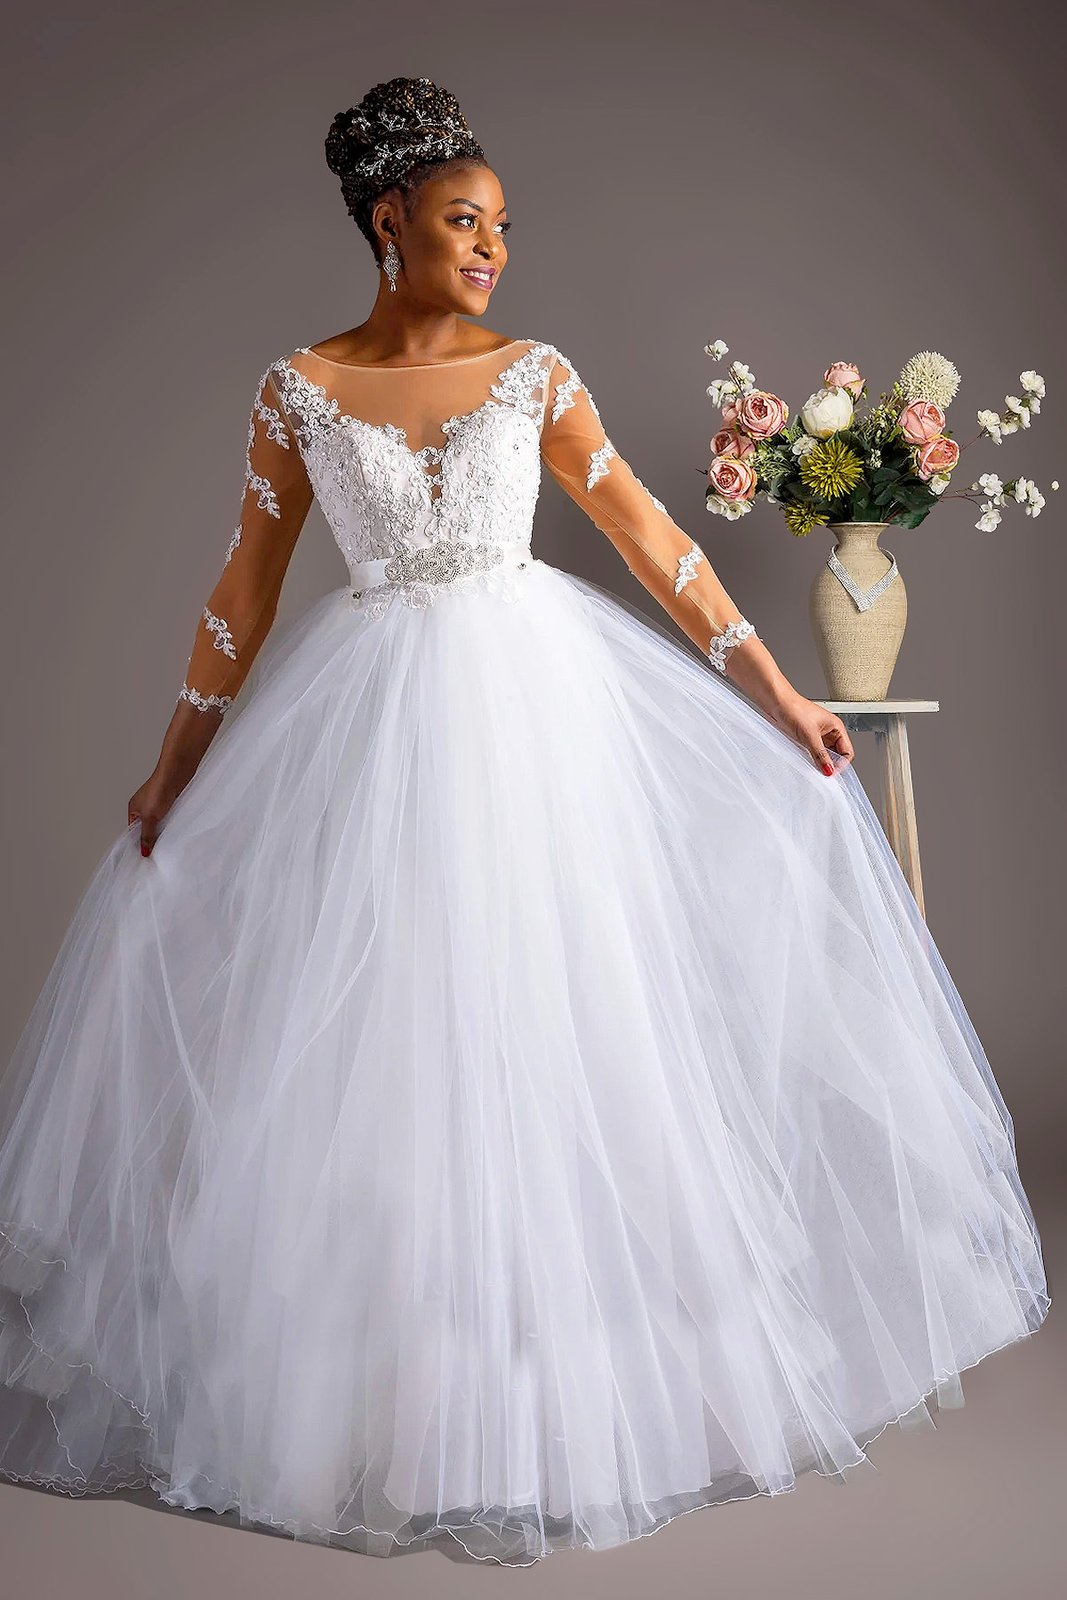 GownLink Luxurious White Wedding Train Gowns for the High-End Christia